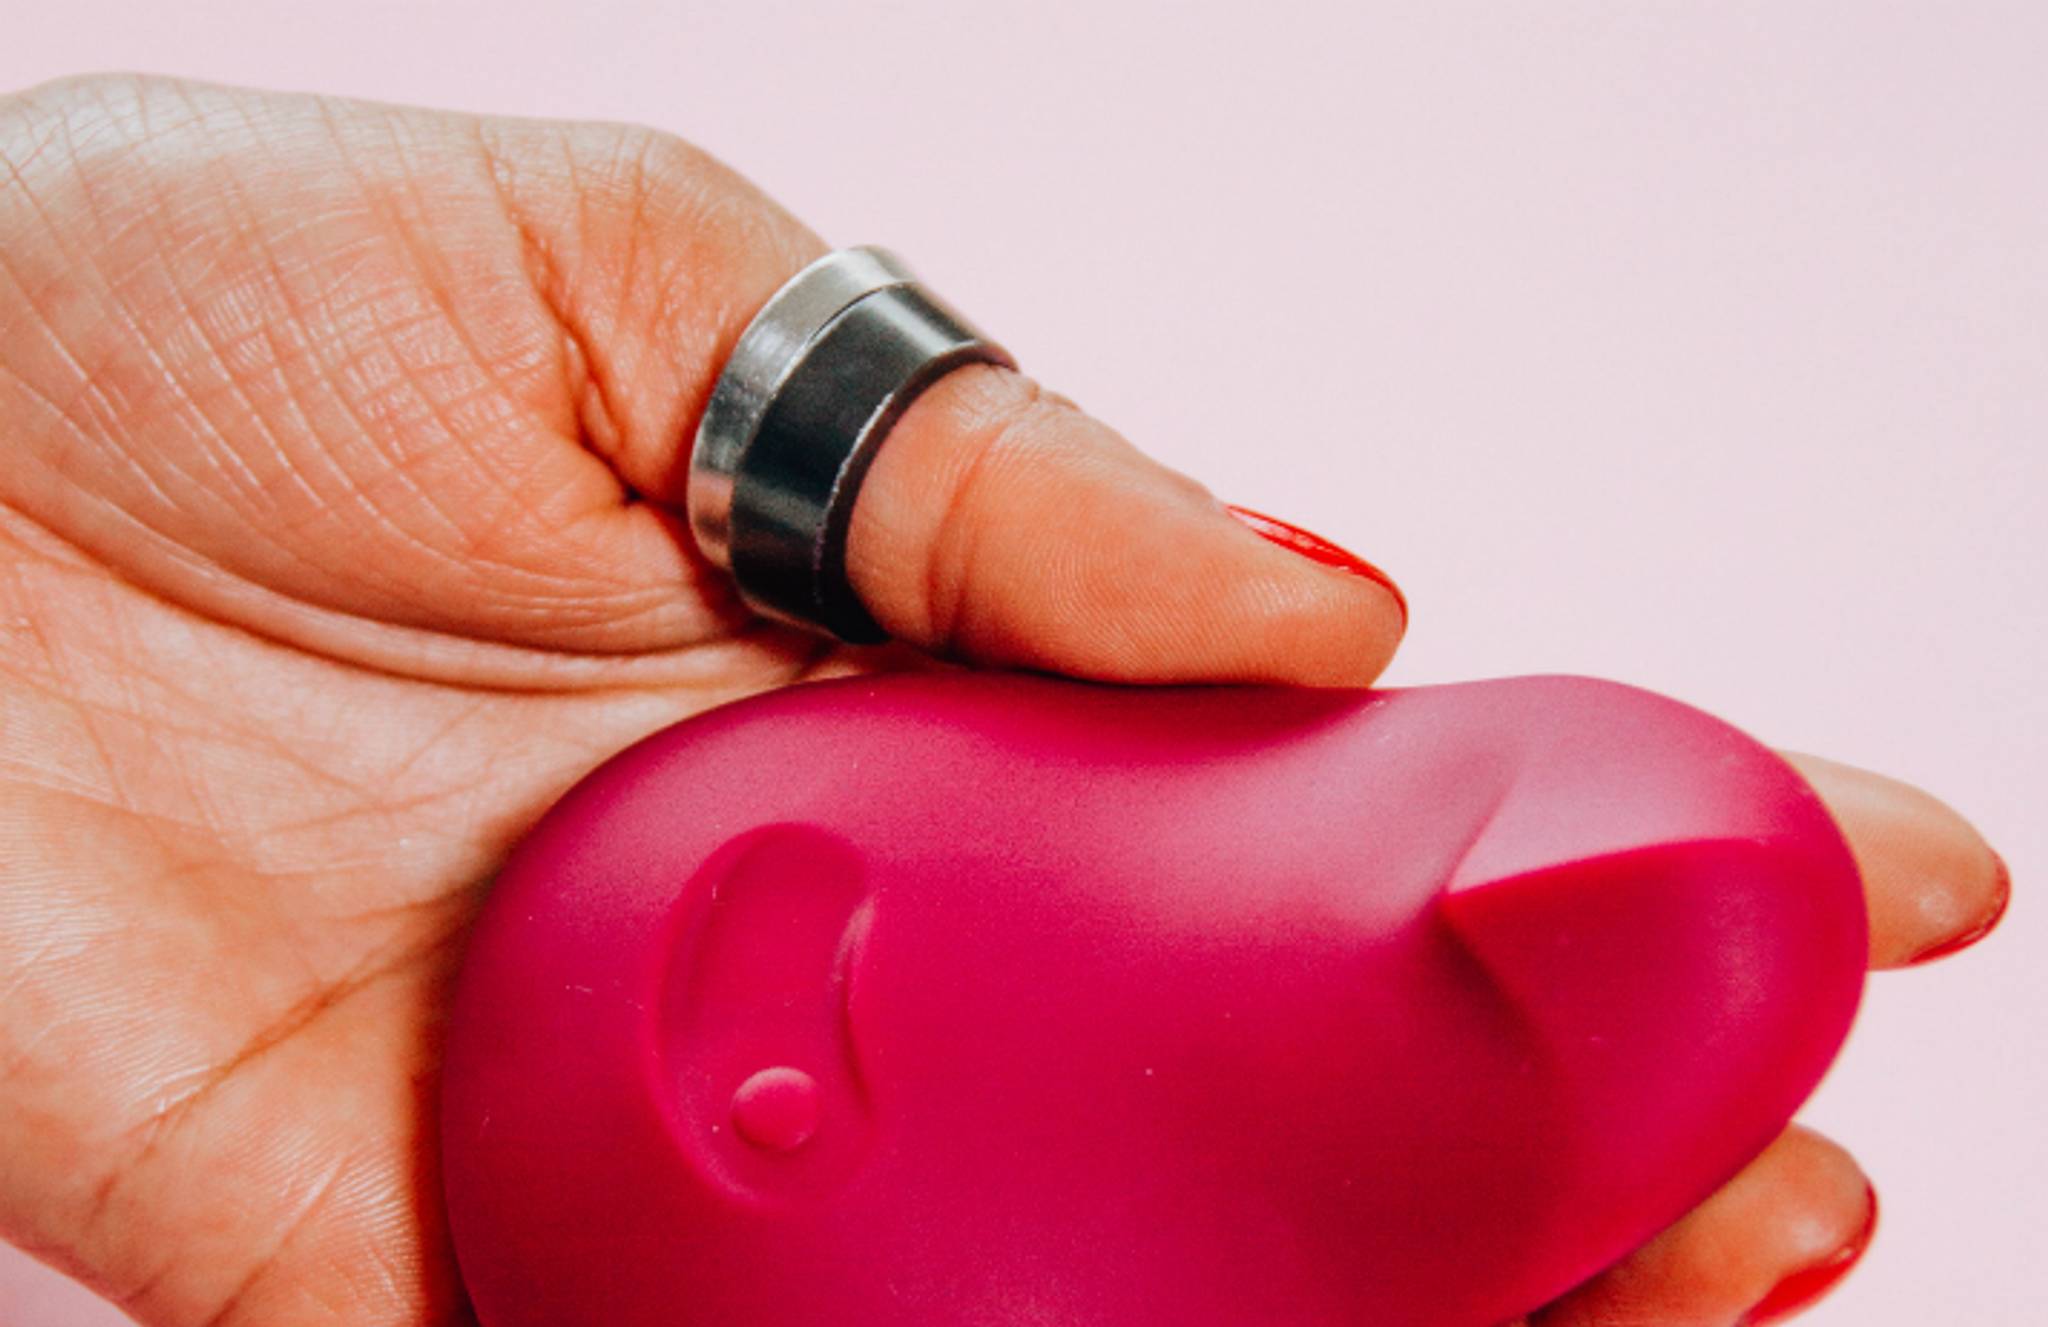 Sex toy sales surge as COVID-19 reshapes intimacy